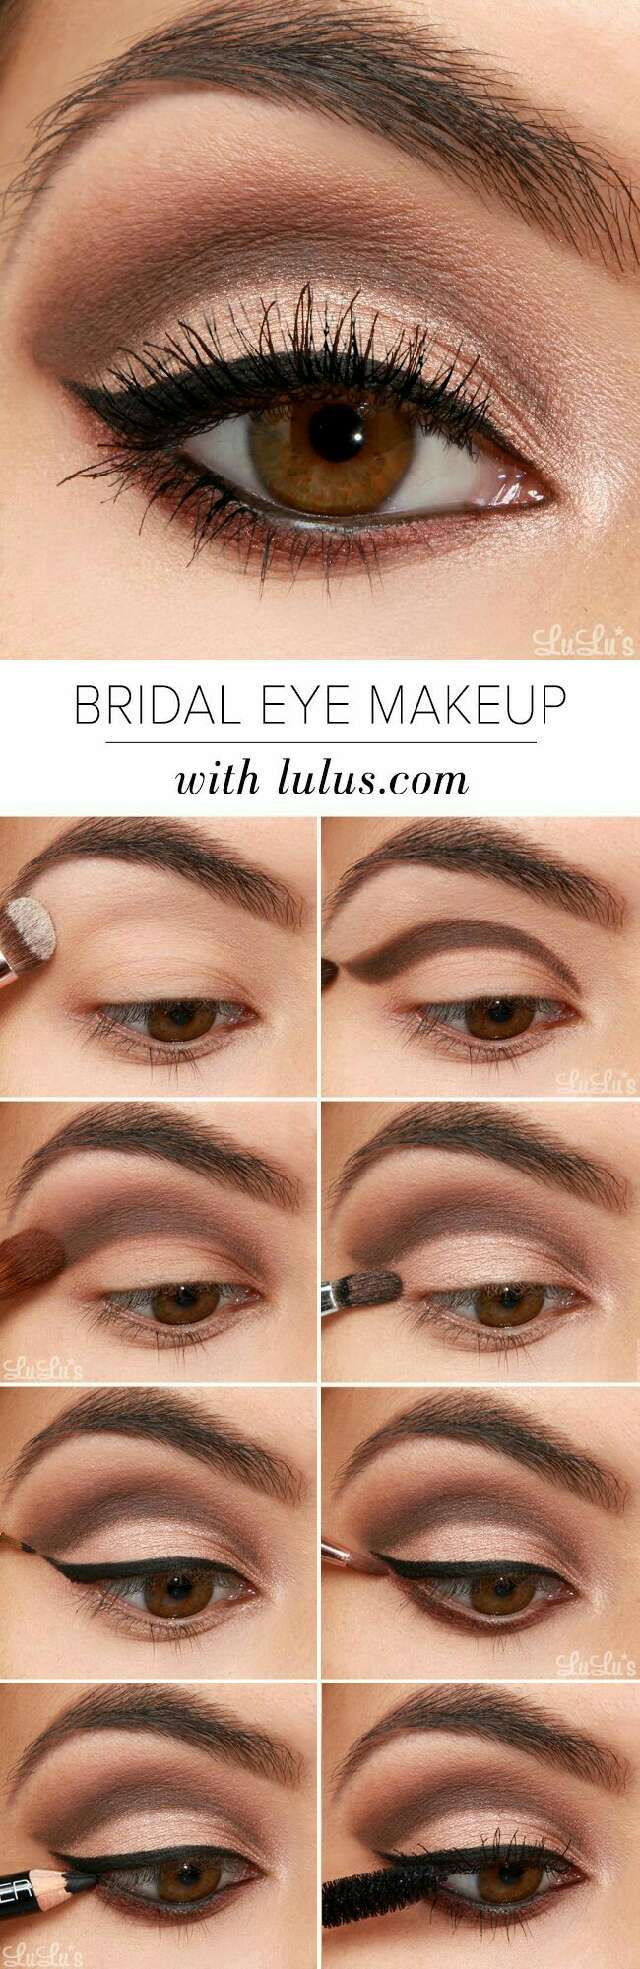 Makeup Styles For Brown Eyes 17 Super Basic Eye Makeup Ideas For Beginners Makeup Beauty